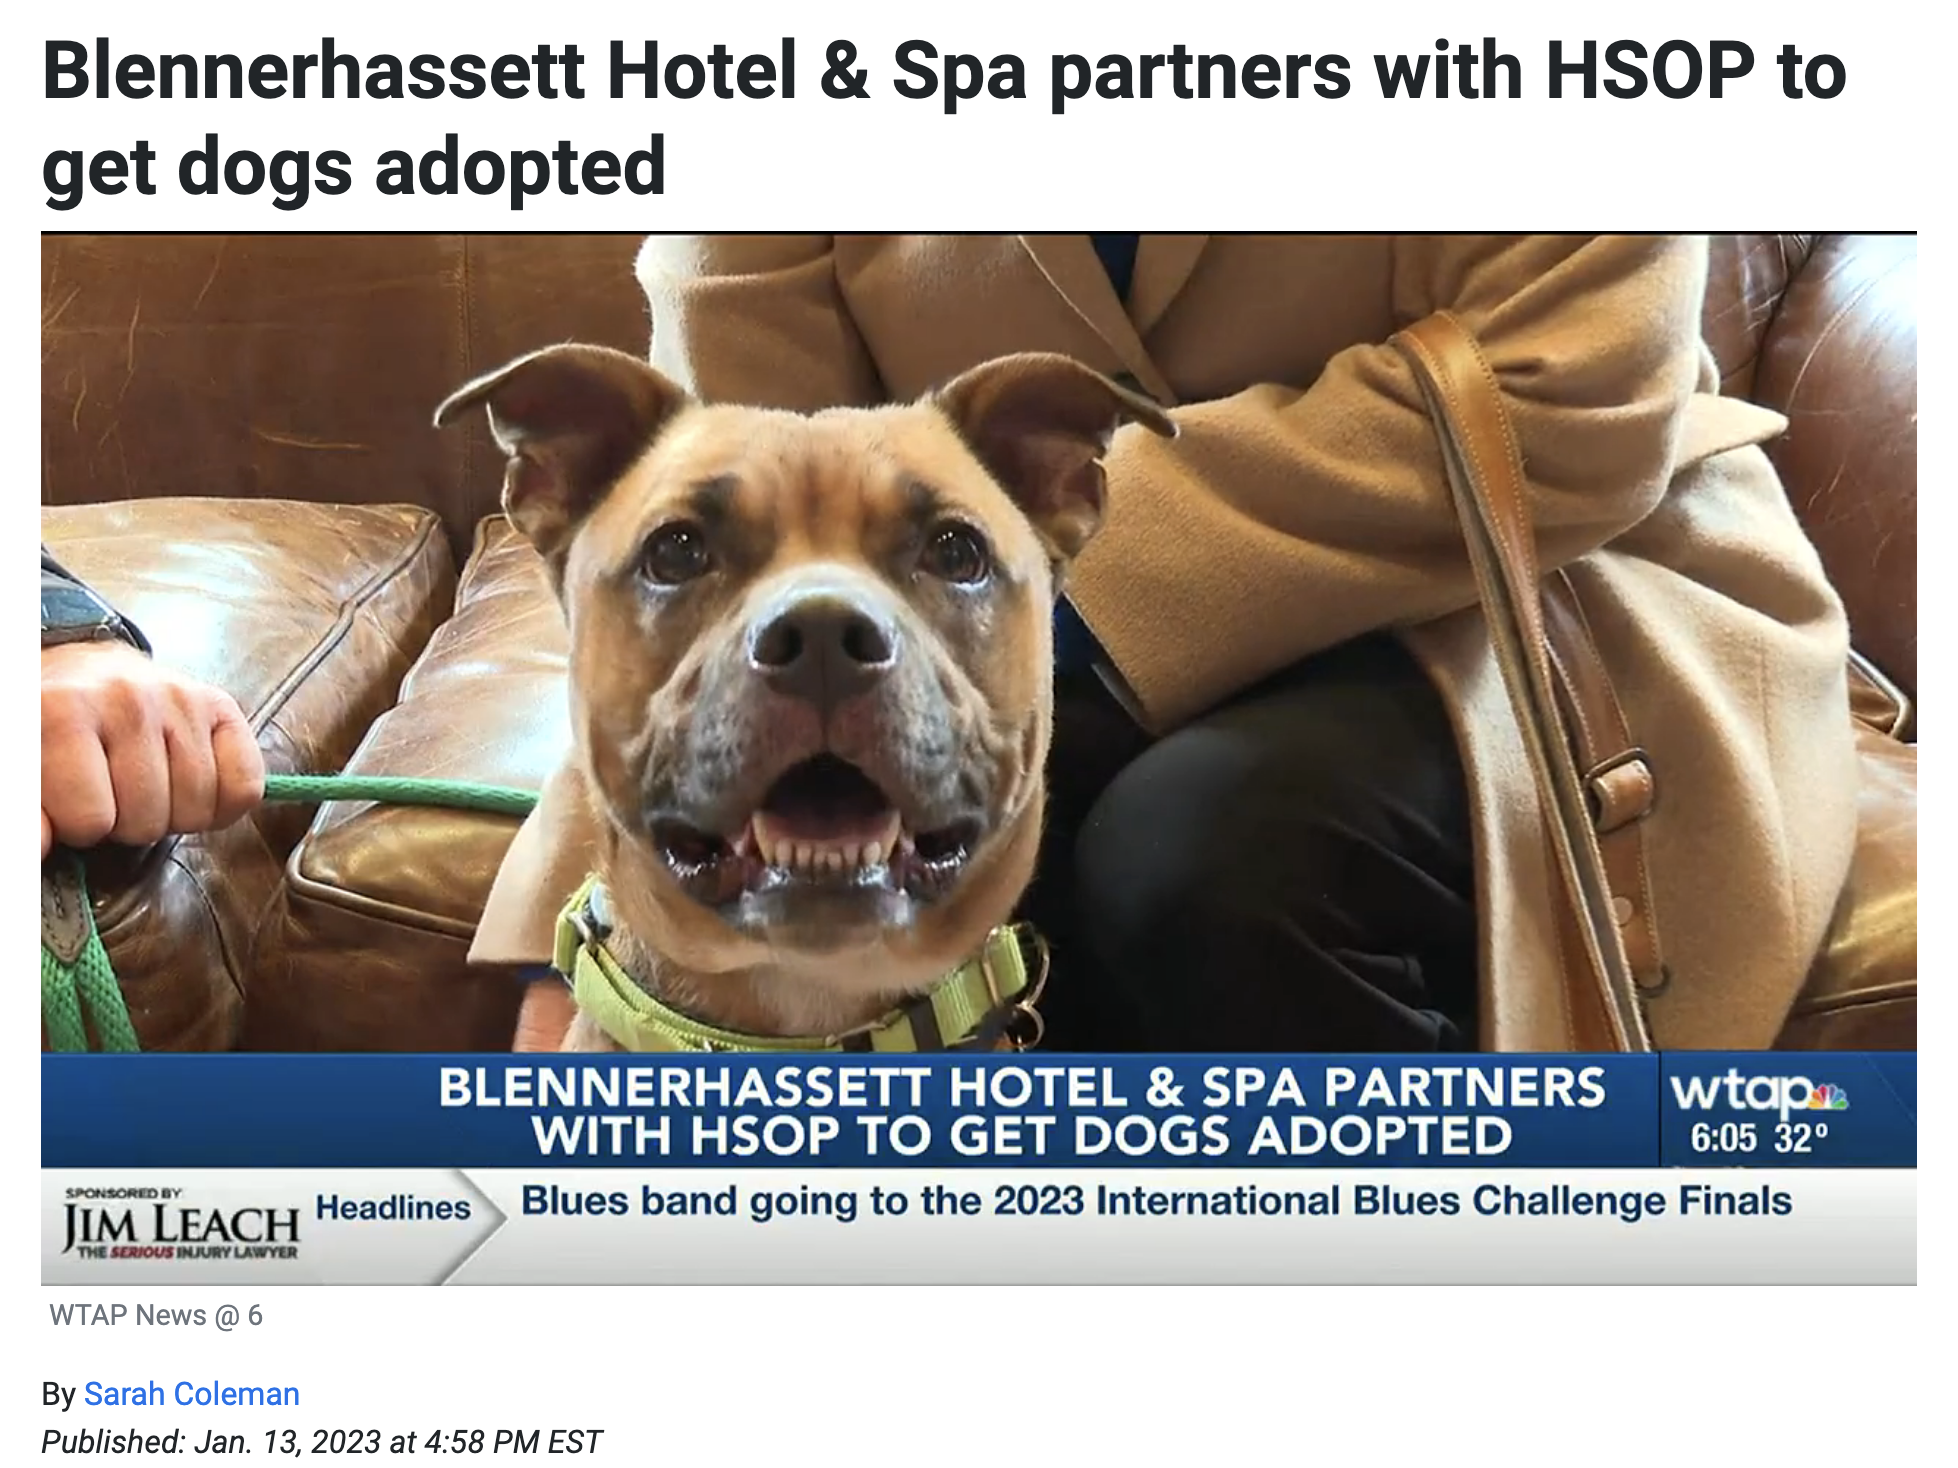 Blennerhassett Hotel and Spa partners with HSOP to get dogs adopted